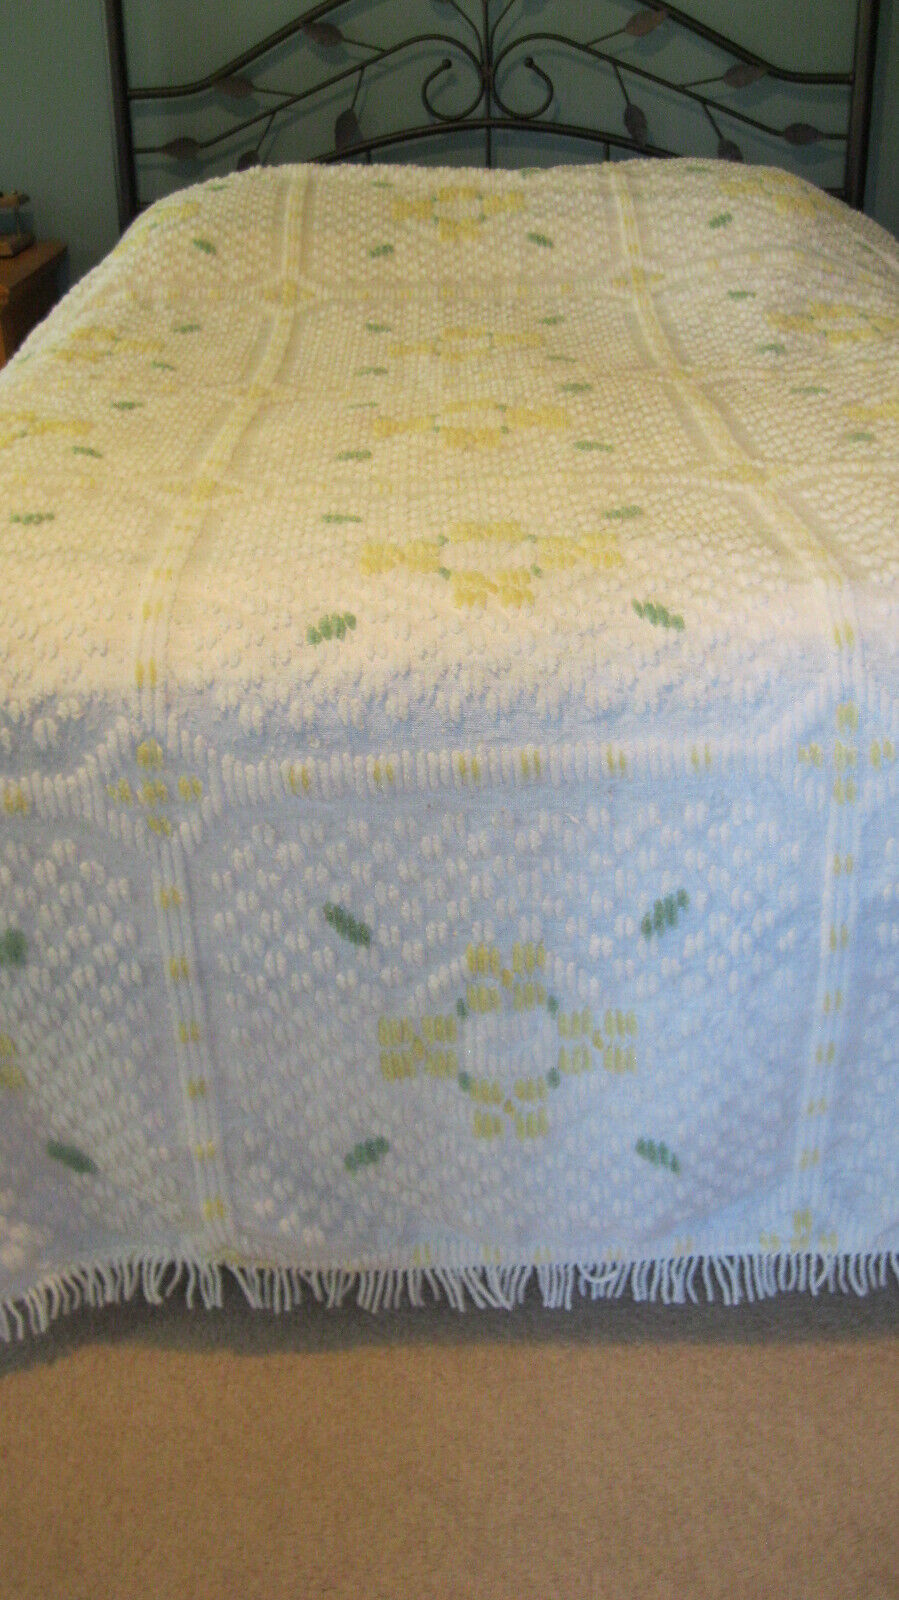 VINTAGE POLYESTER CHENILLE BEDSPREAD FRINGE YELLOW FLOWERS  - GOOD